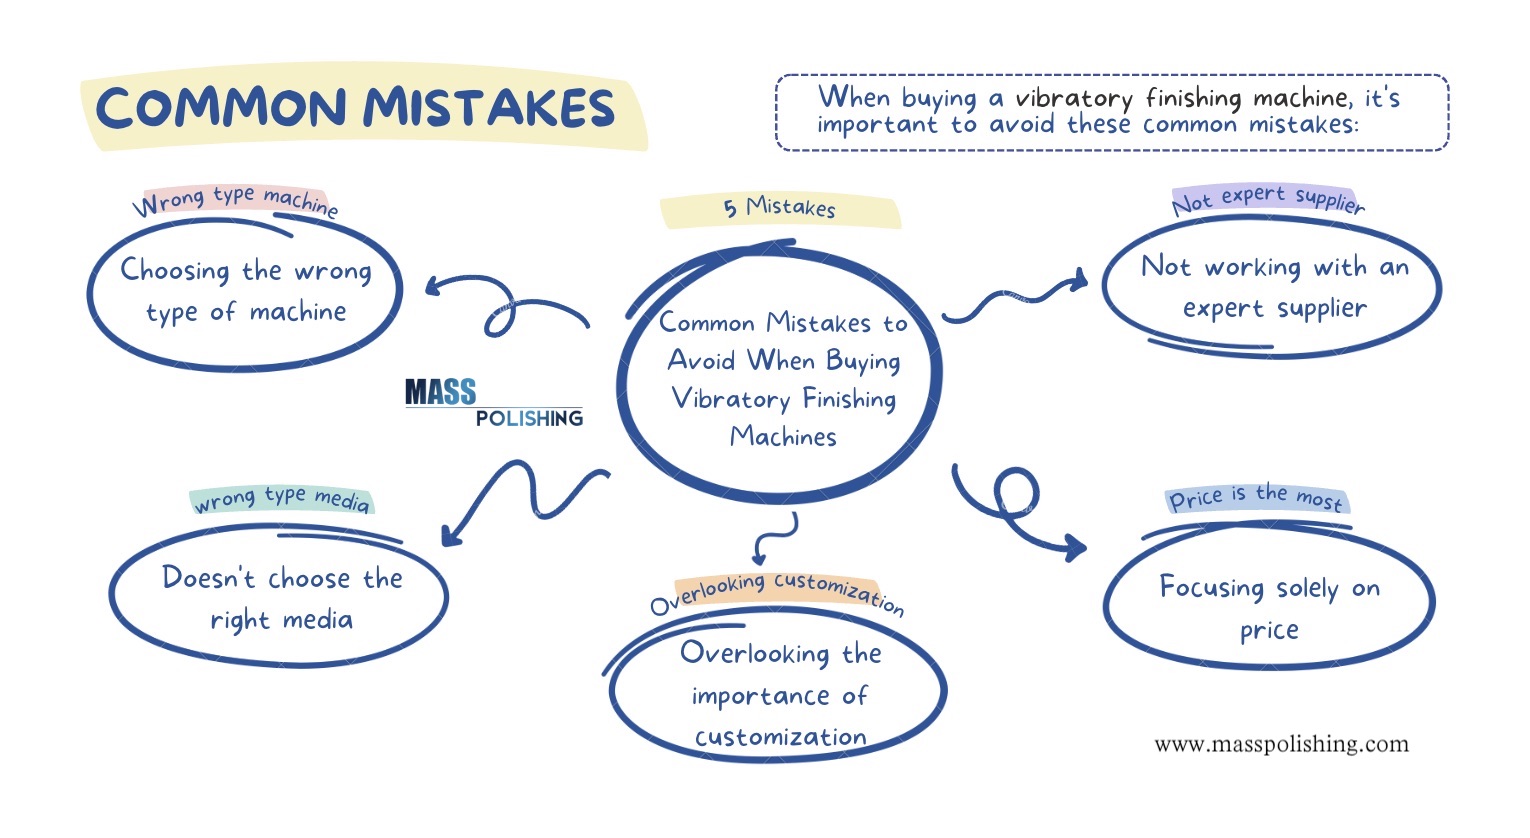 common mistakes to avoid when buying vibratory finishing machines